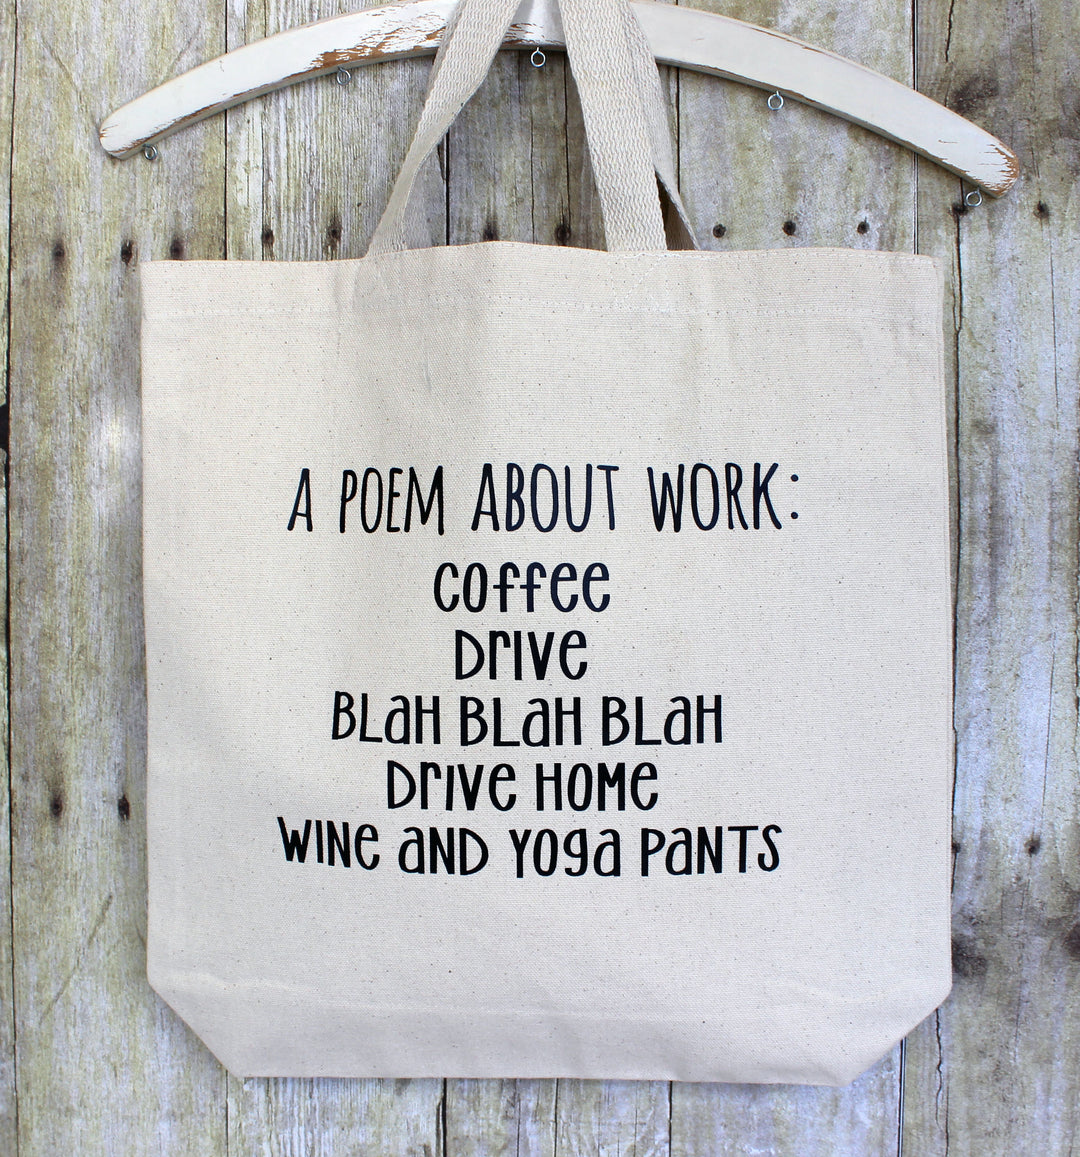 work poem - tote bag - Pretty Clever Words